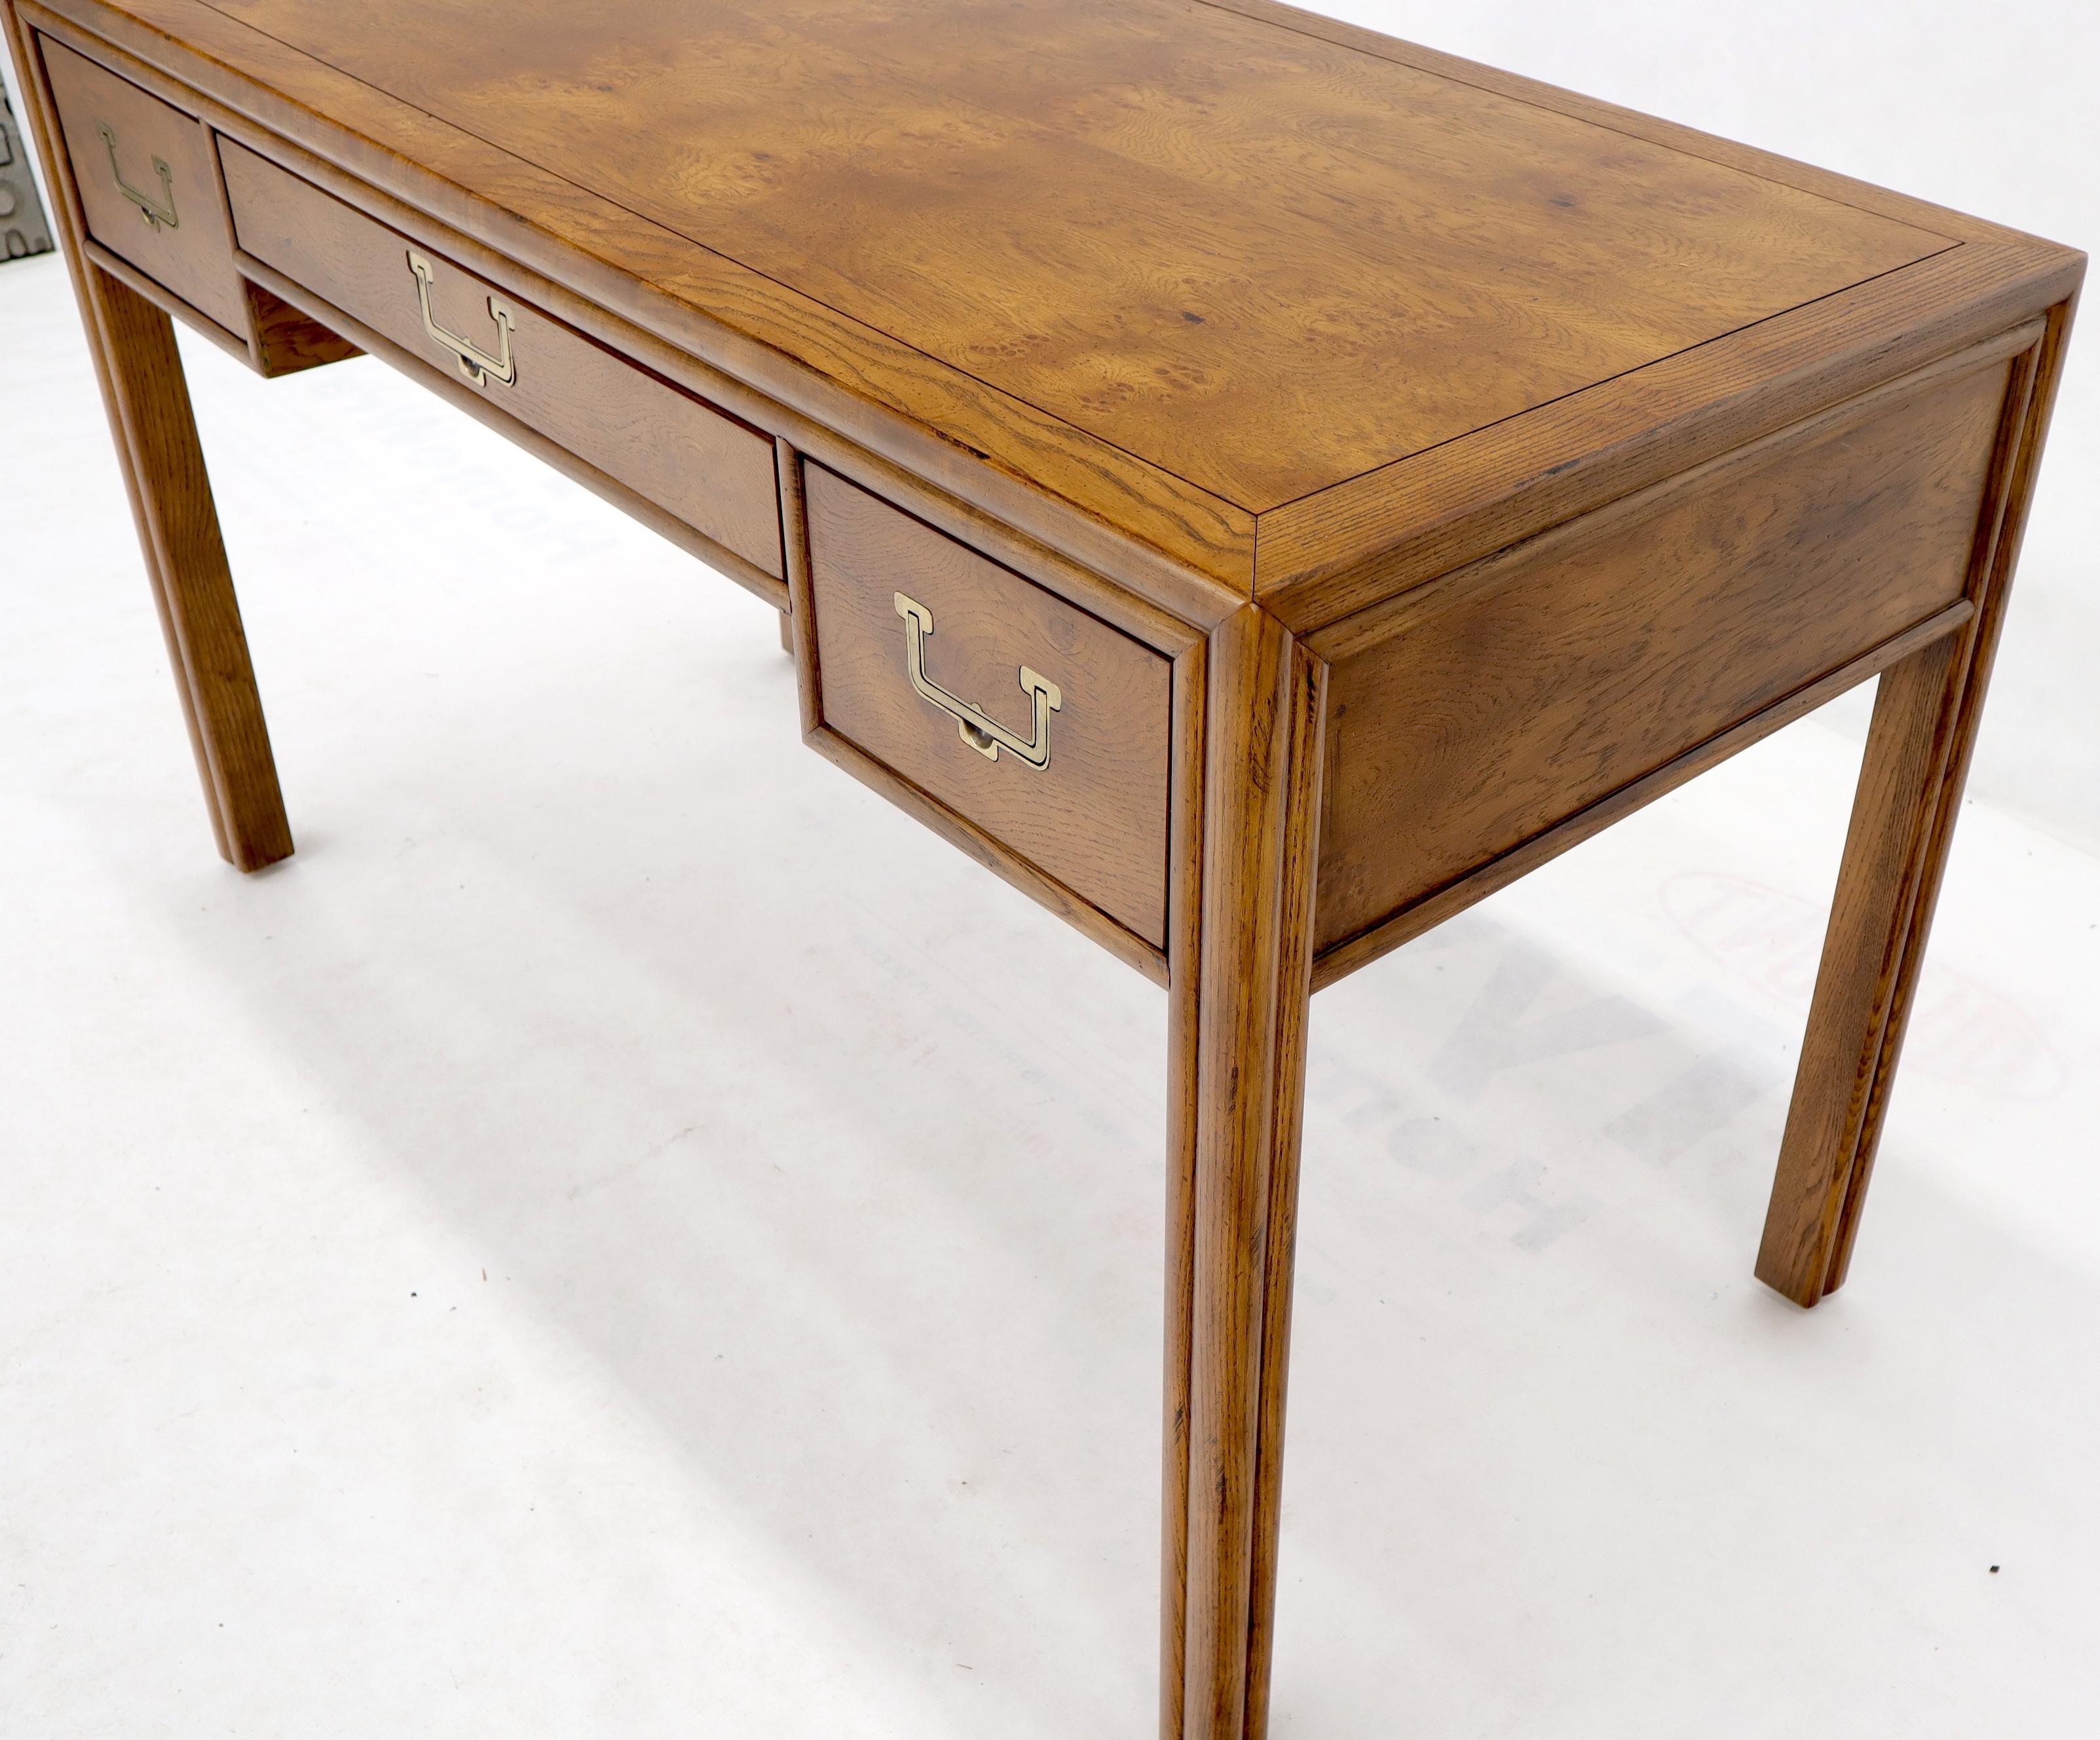 20th Century Campaign Mid-Century Modern 3 Drawers Writing Table Desk by Henredon